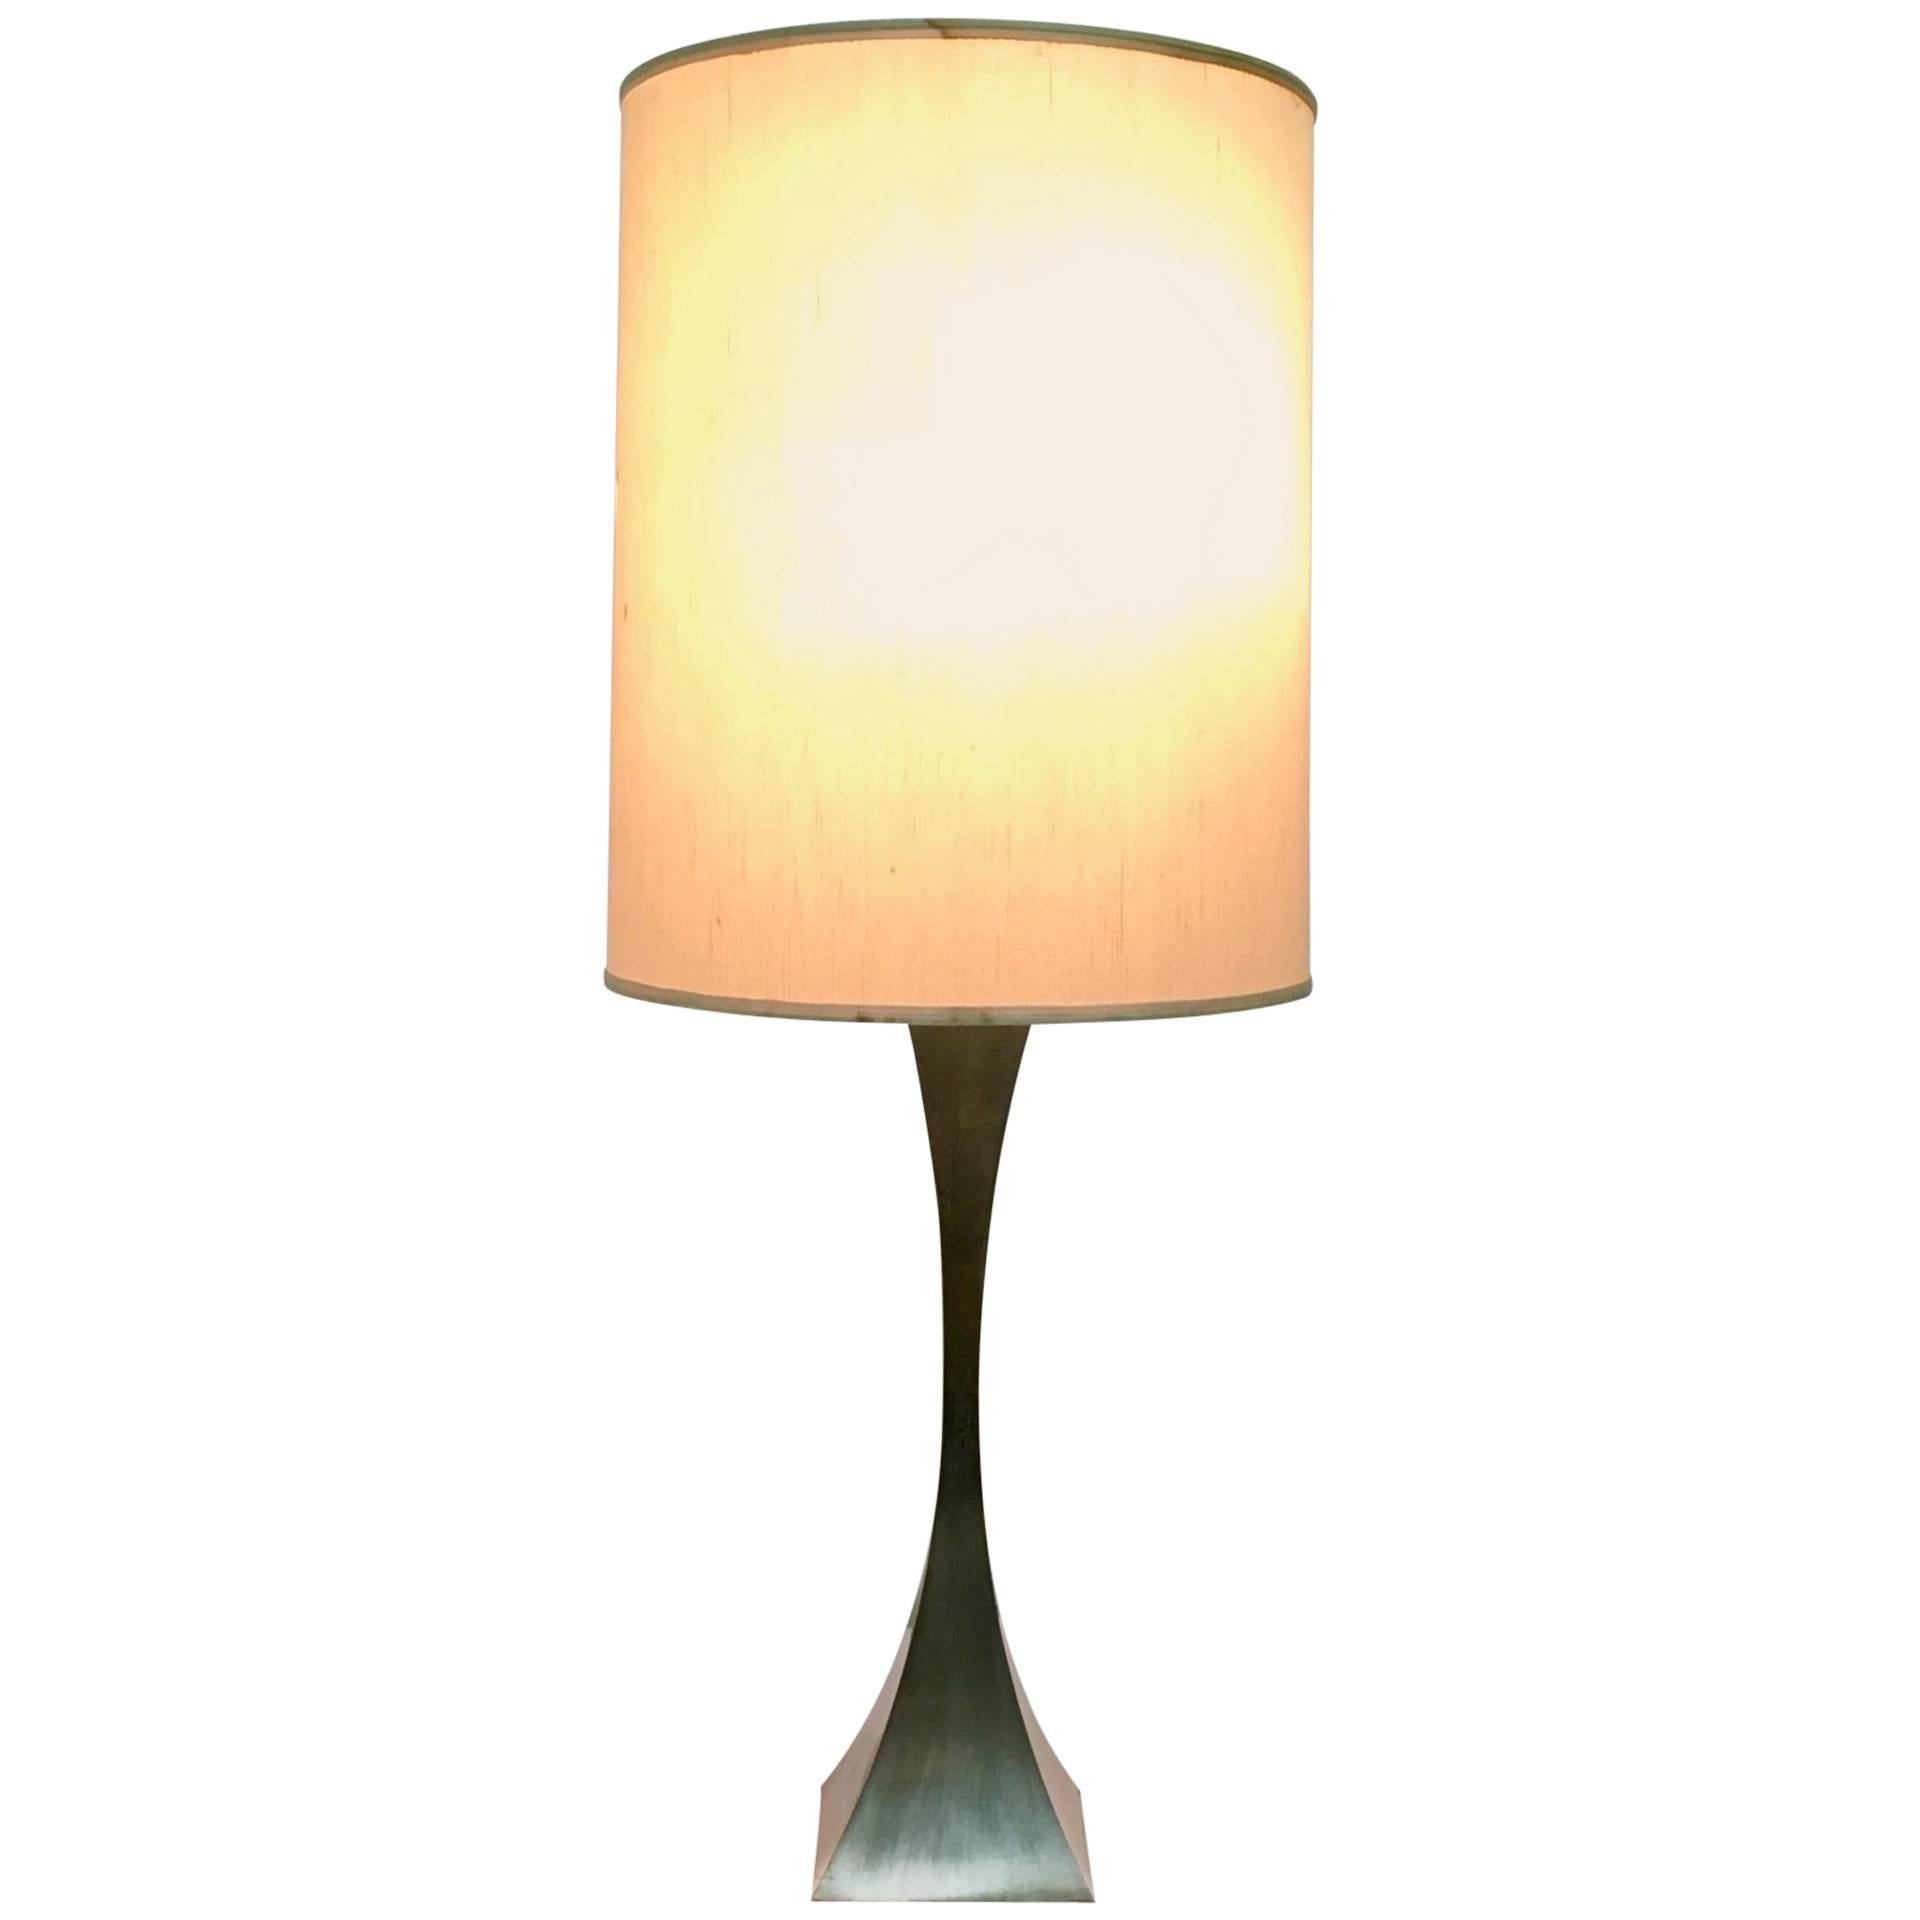 Made in Italy.
This table lamp was designed by Tonello and Montagna Grillo for High Society, in 1972. 
Its structure is in chrome-plated metal.
This lamp is a vintage piece, therefore it might show slight traces of use, but it can be considered as